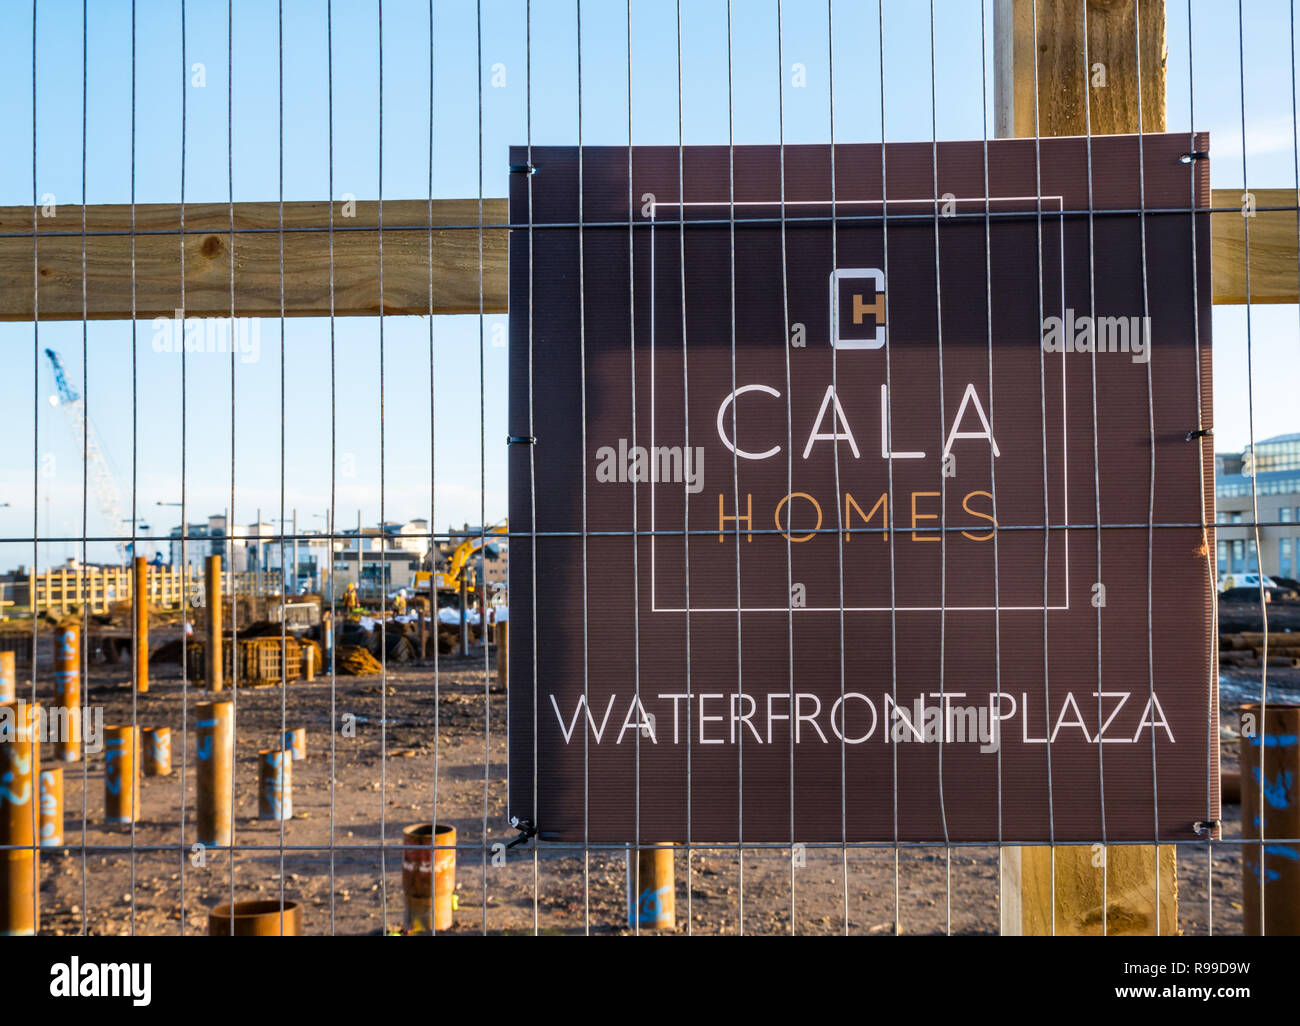 Advertising sign for Cala Homes at building site of Waterfront Plaza, Victoria Quay, Leith, Edinburgh, Scotland, UK Stock Photo